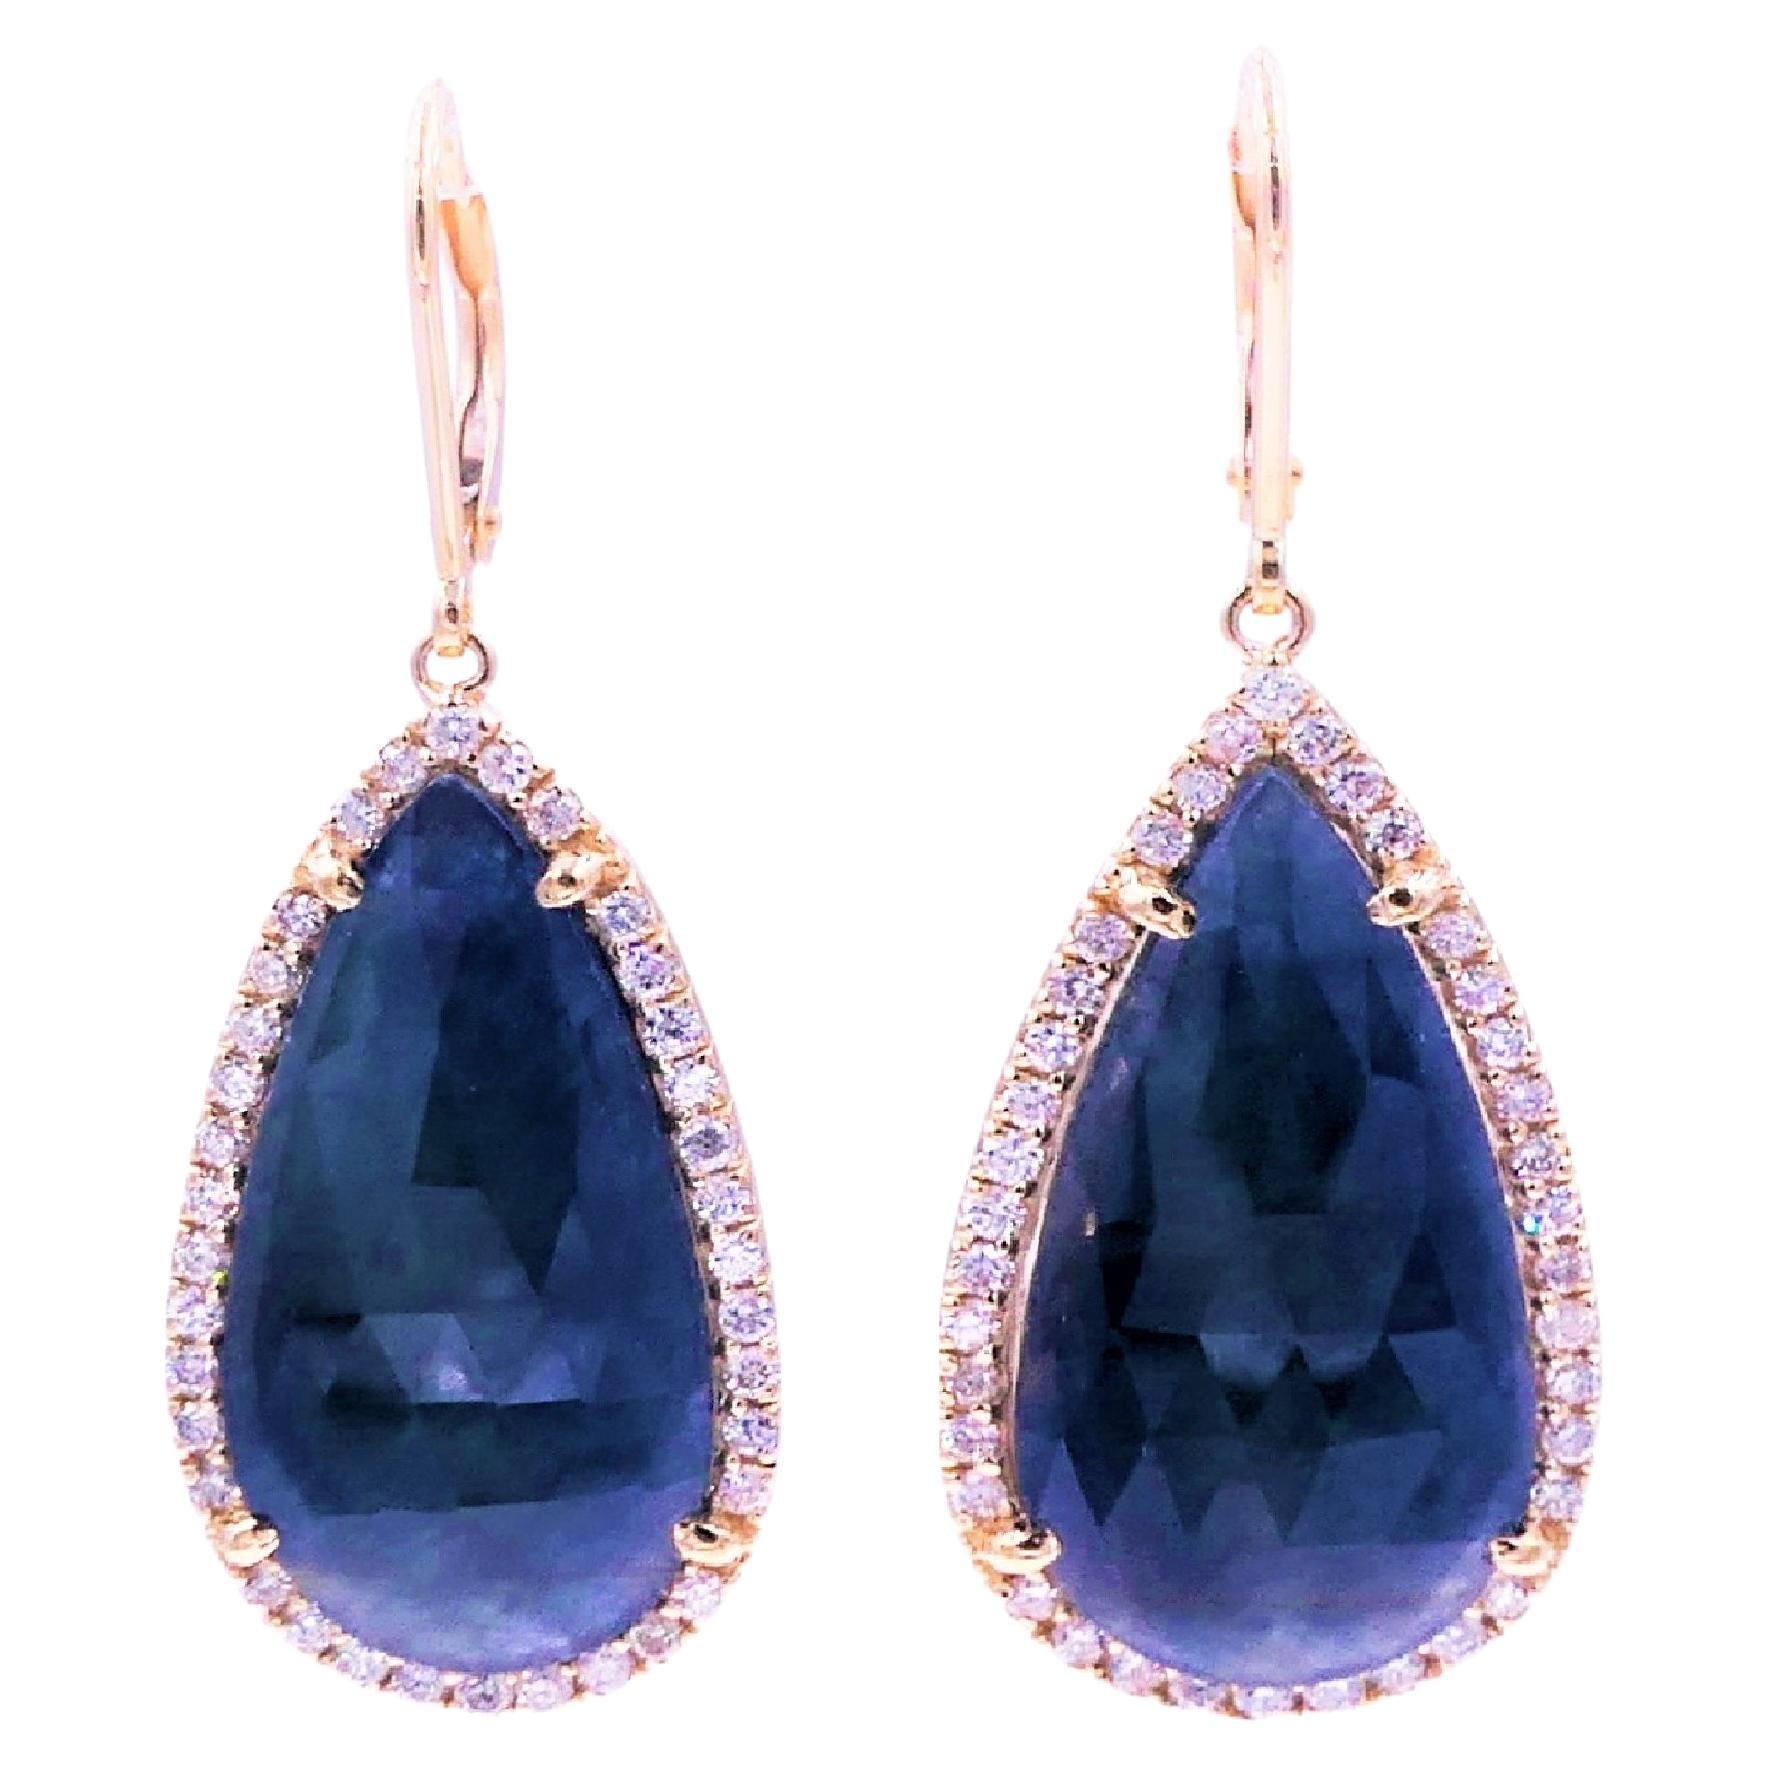 Blue Sapphire Pear Drop Faceted Cabochon Diamond Halo Drop 18K Gold Earrings
18 Karat Yellow Gold
1.00 CT Diamonds
Dark Blue Sapphire Faceted Cabochon Slices 

Important Information:
Please note that this item will take 2-4 weeks to deliver - it is